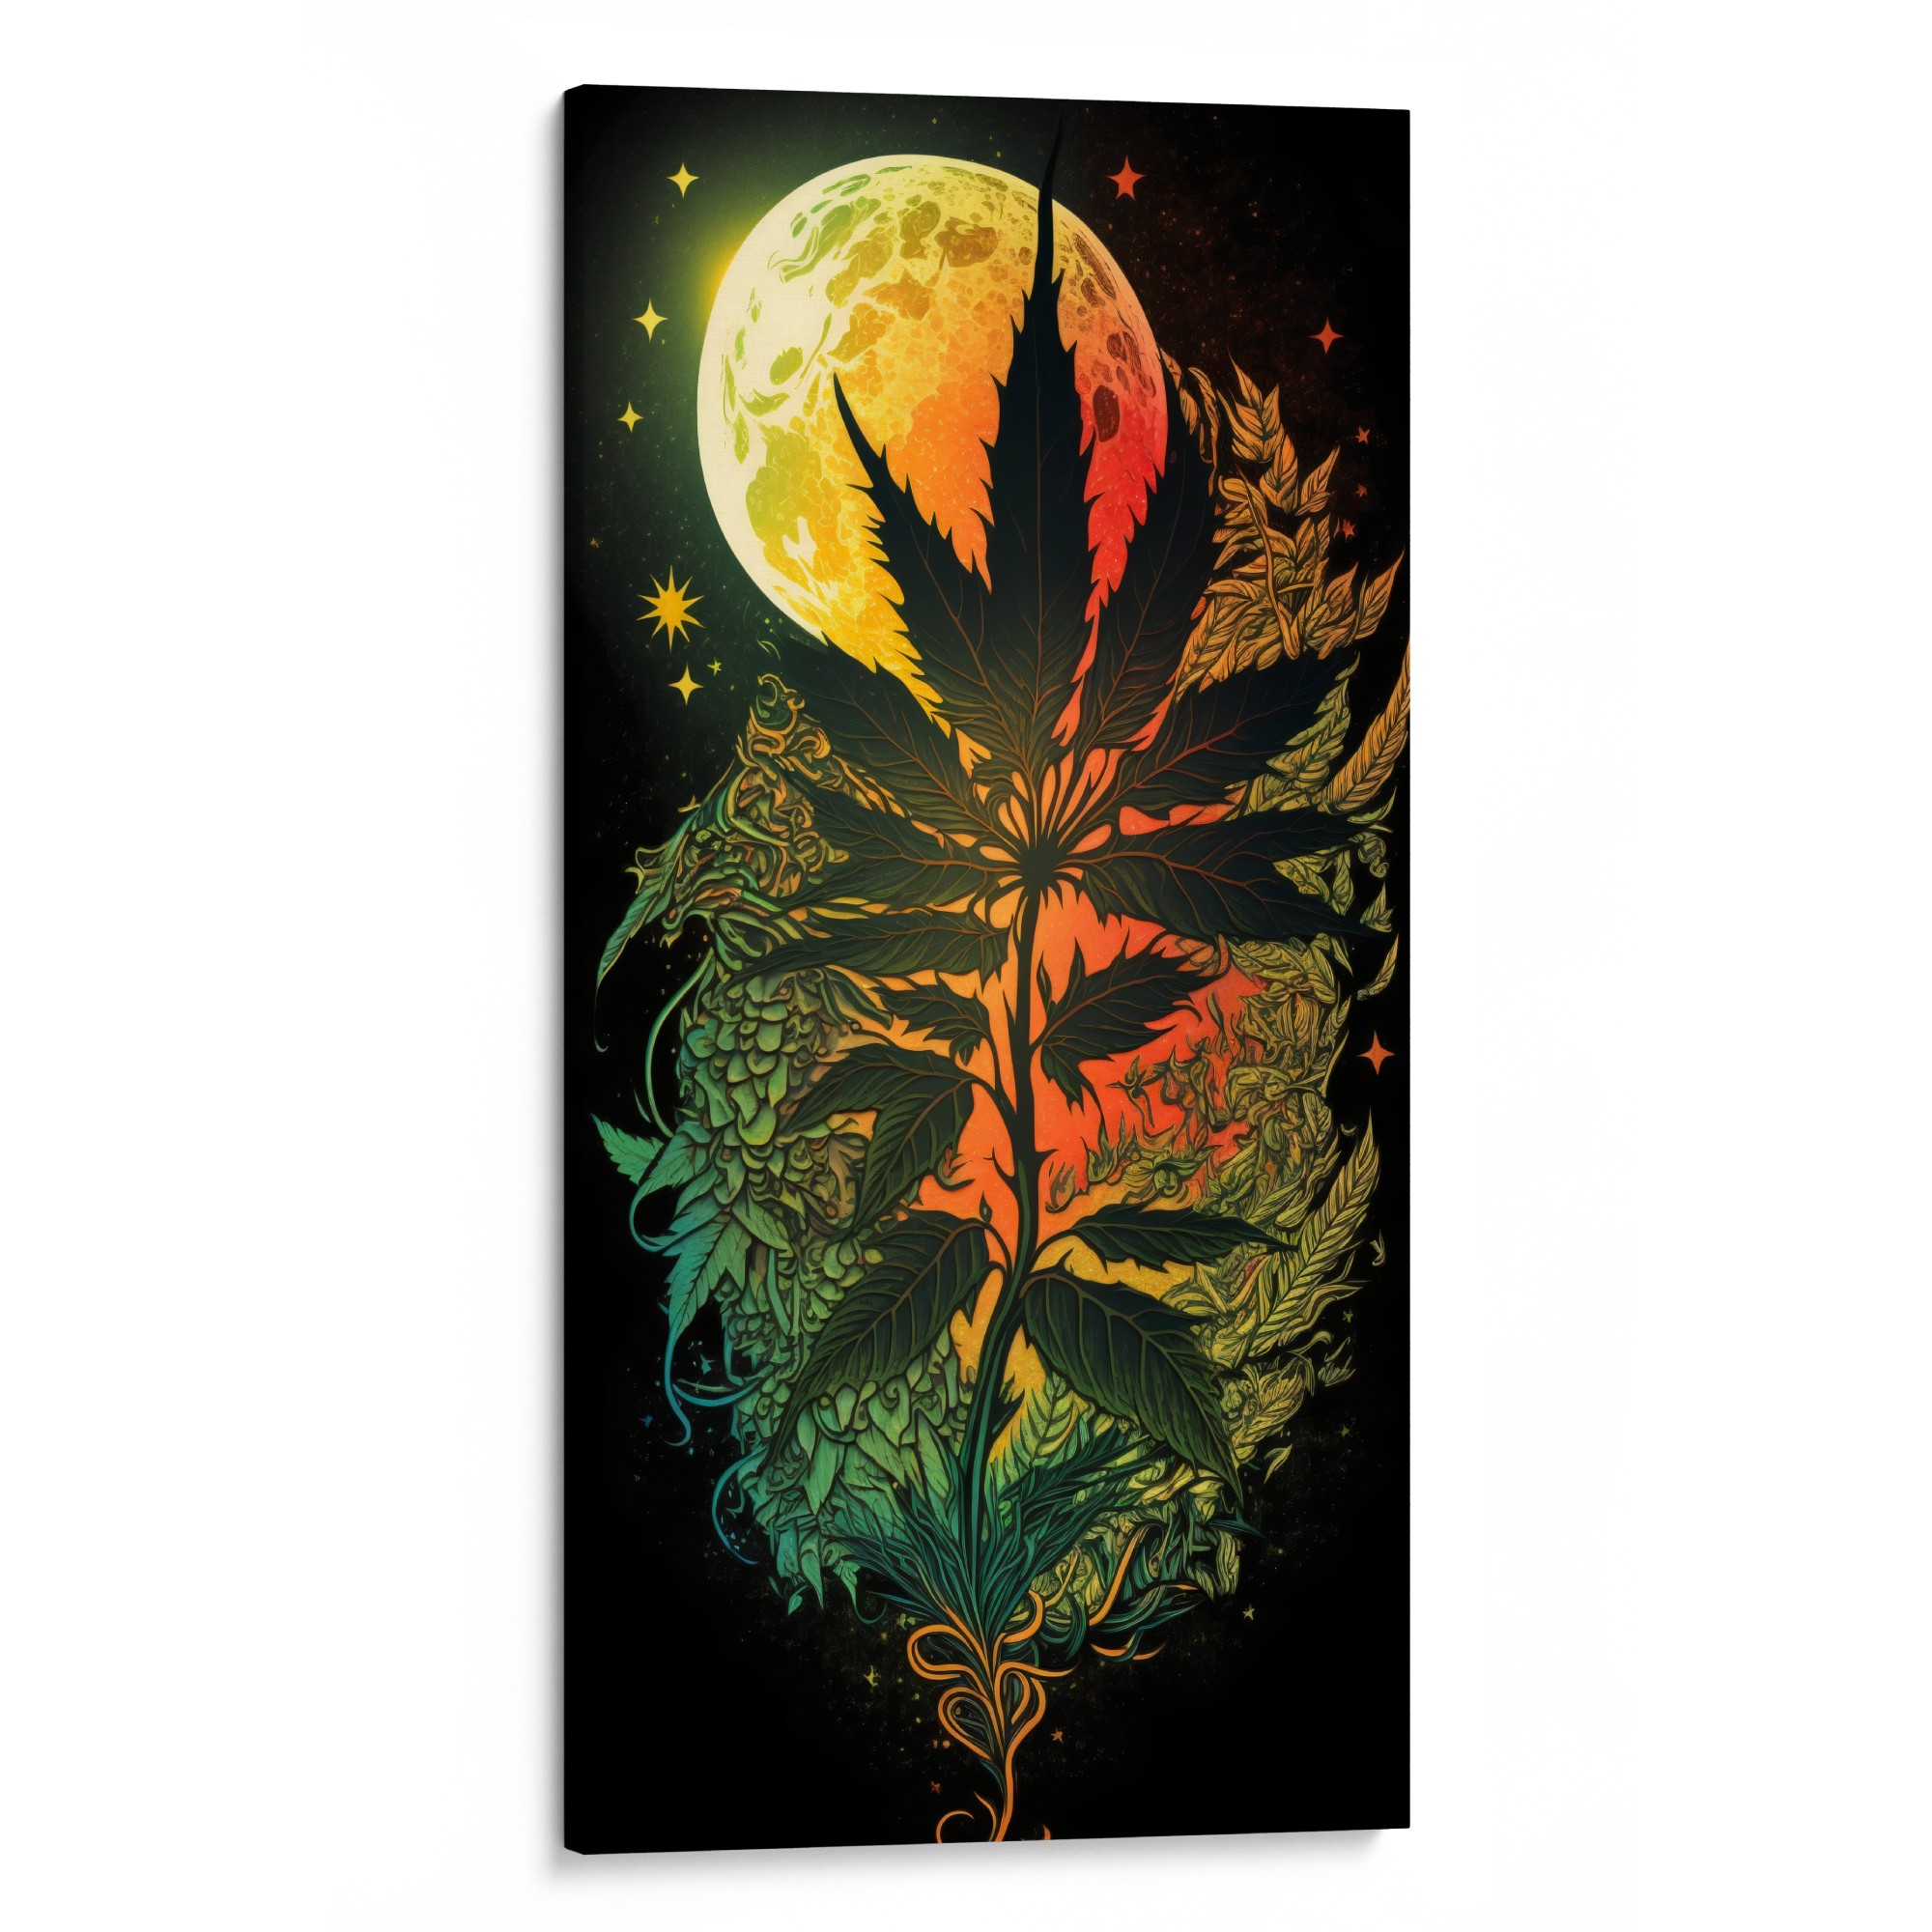 GREENLIT MOON Canvas - A tale of cosmic harmony and nature's splendor.